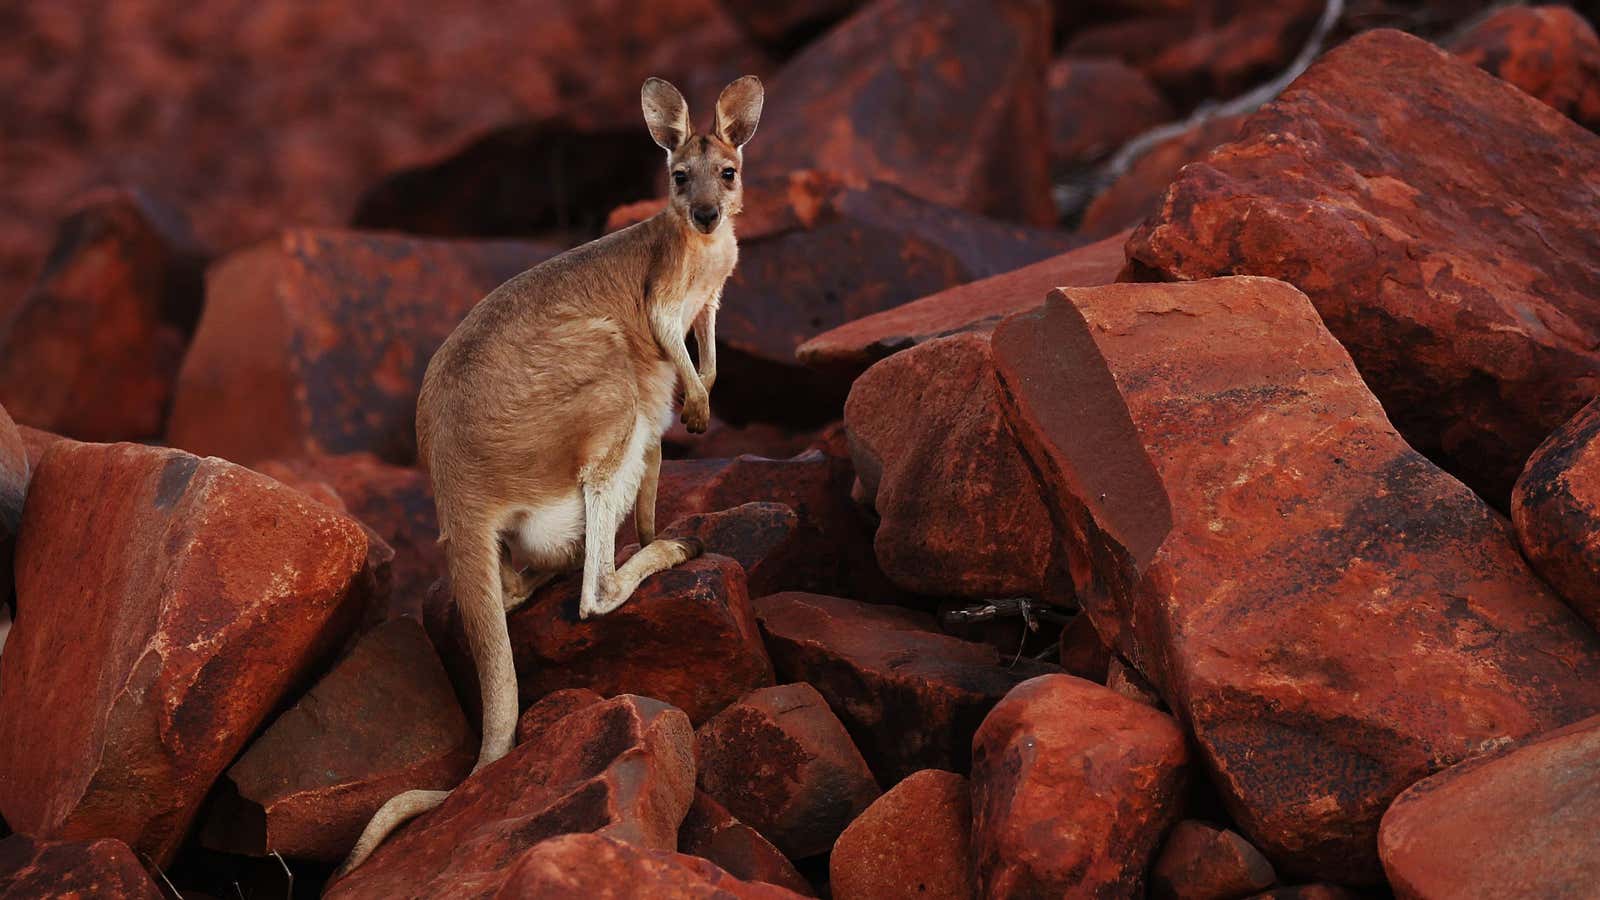 There’s is nothing more Australian than a kangaroo frolicking in a pile of iron ore.